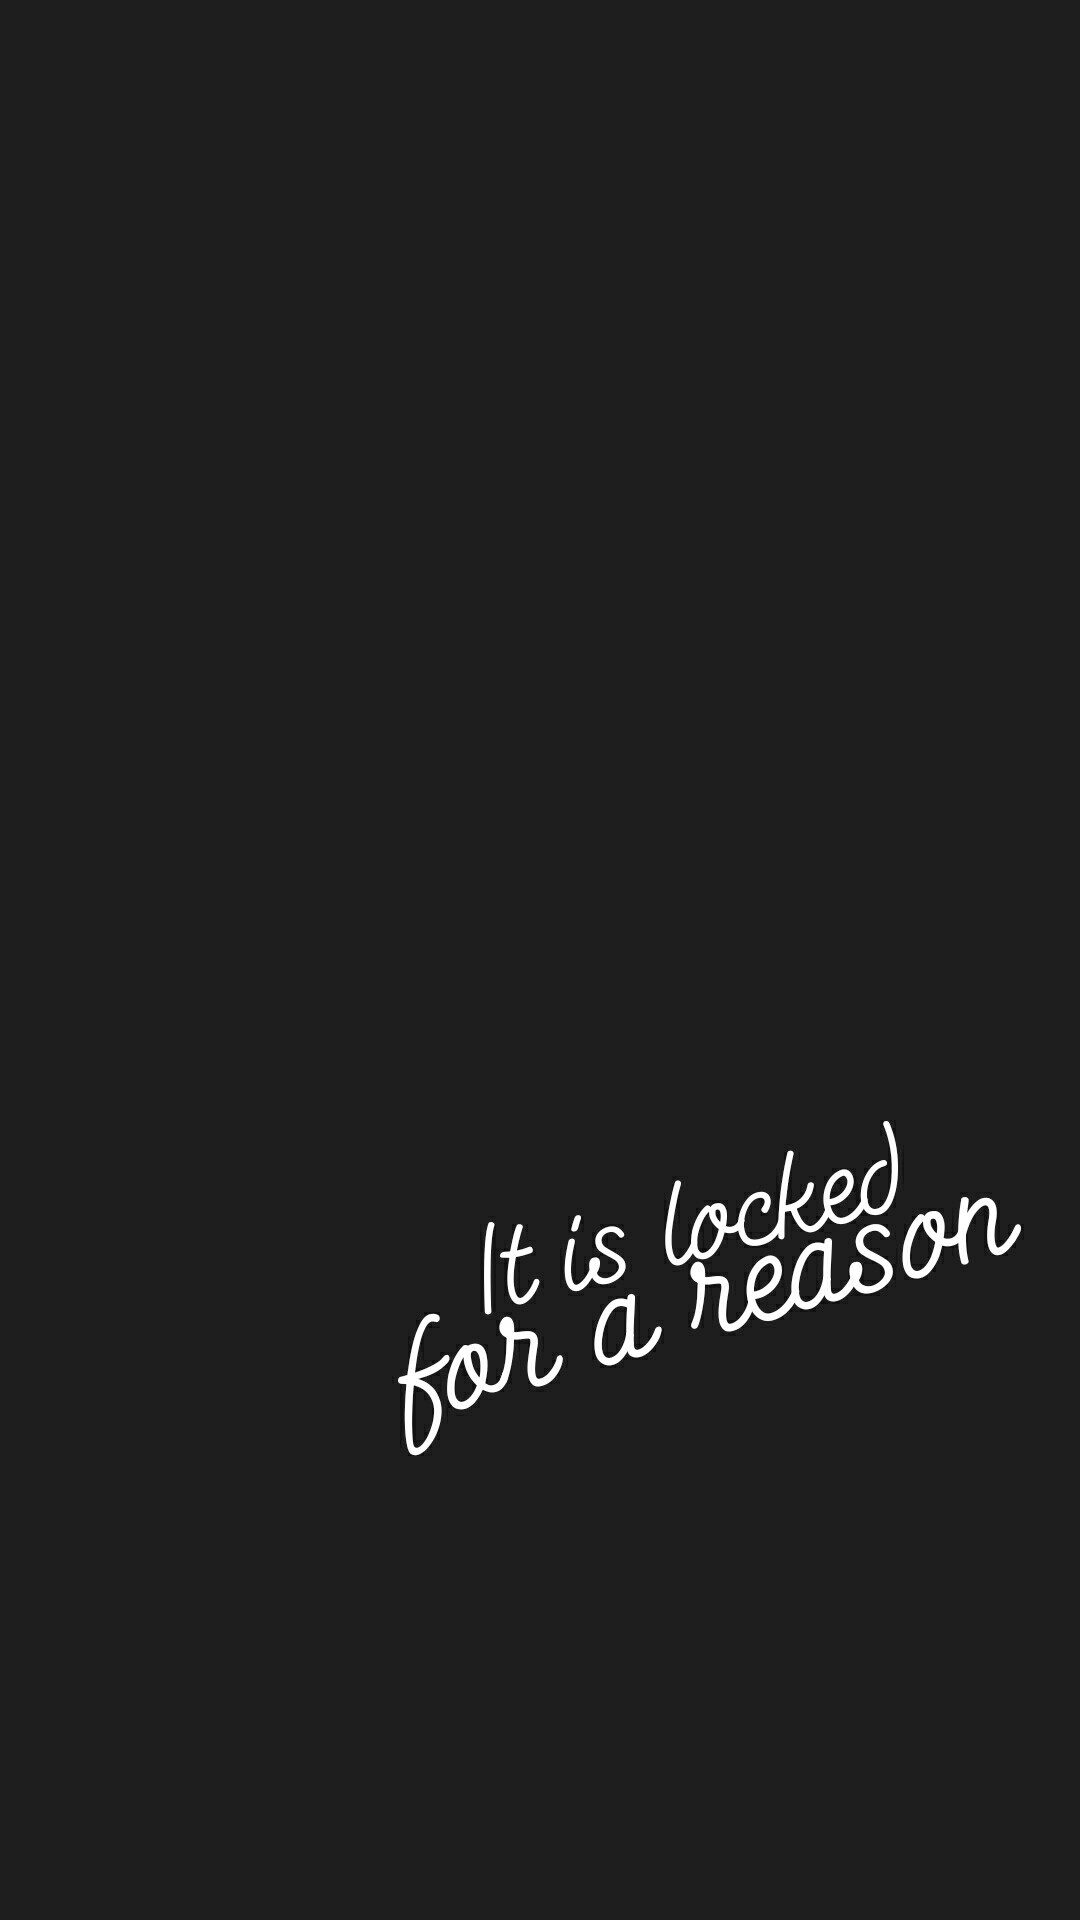 Locked for Reason – Tap to see more locked phone wallpapers! – @mobile9